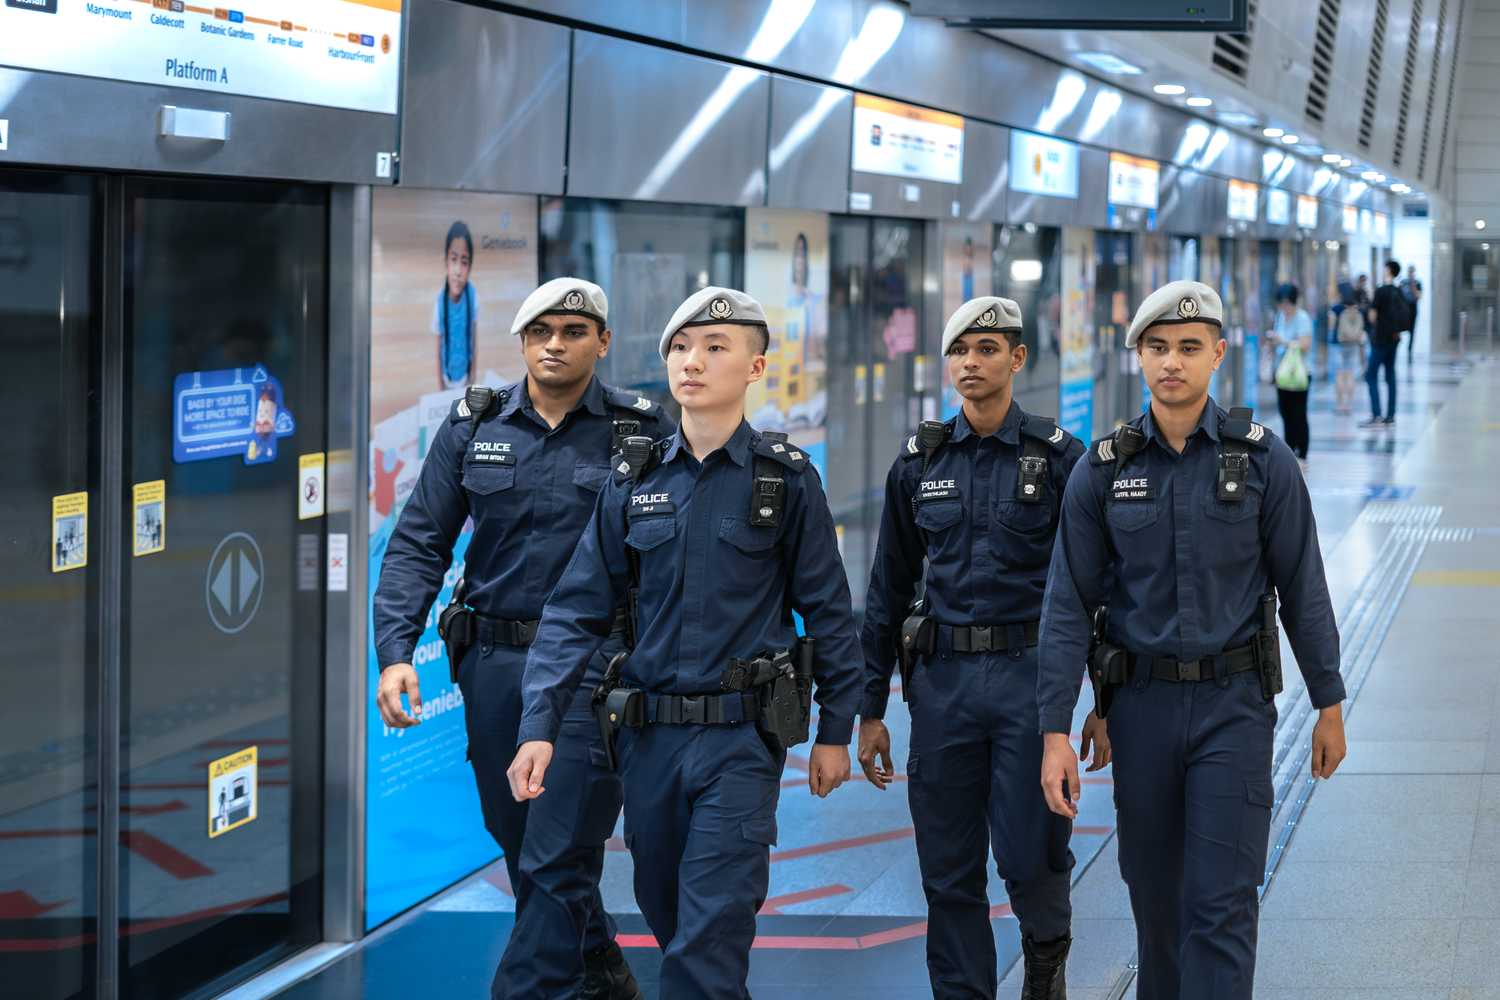 four officers in blue uniform , grey beret and full gear patrolling the platform of an underground MRT